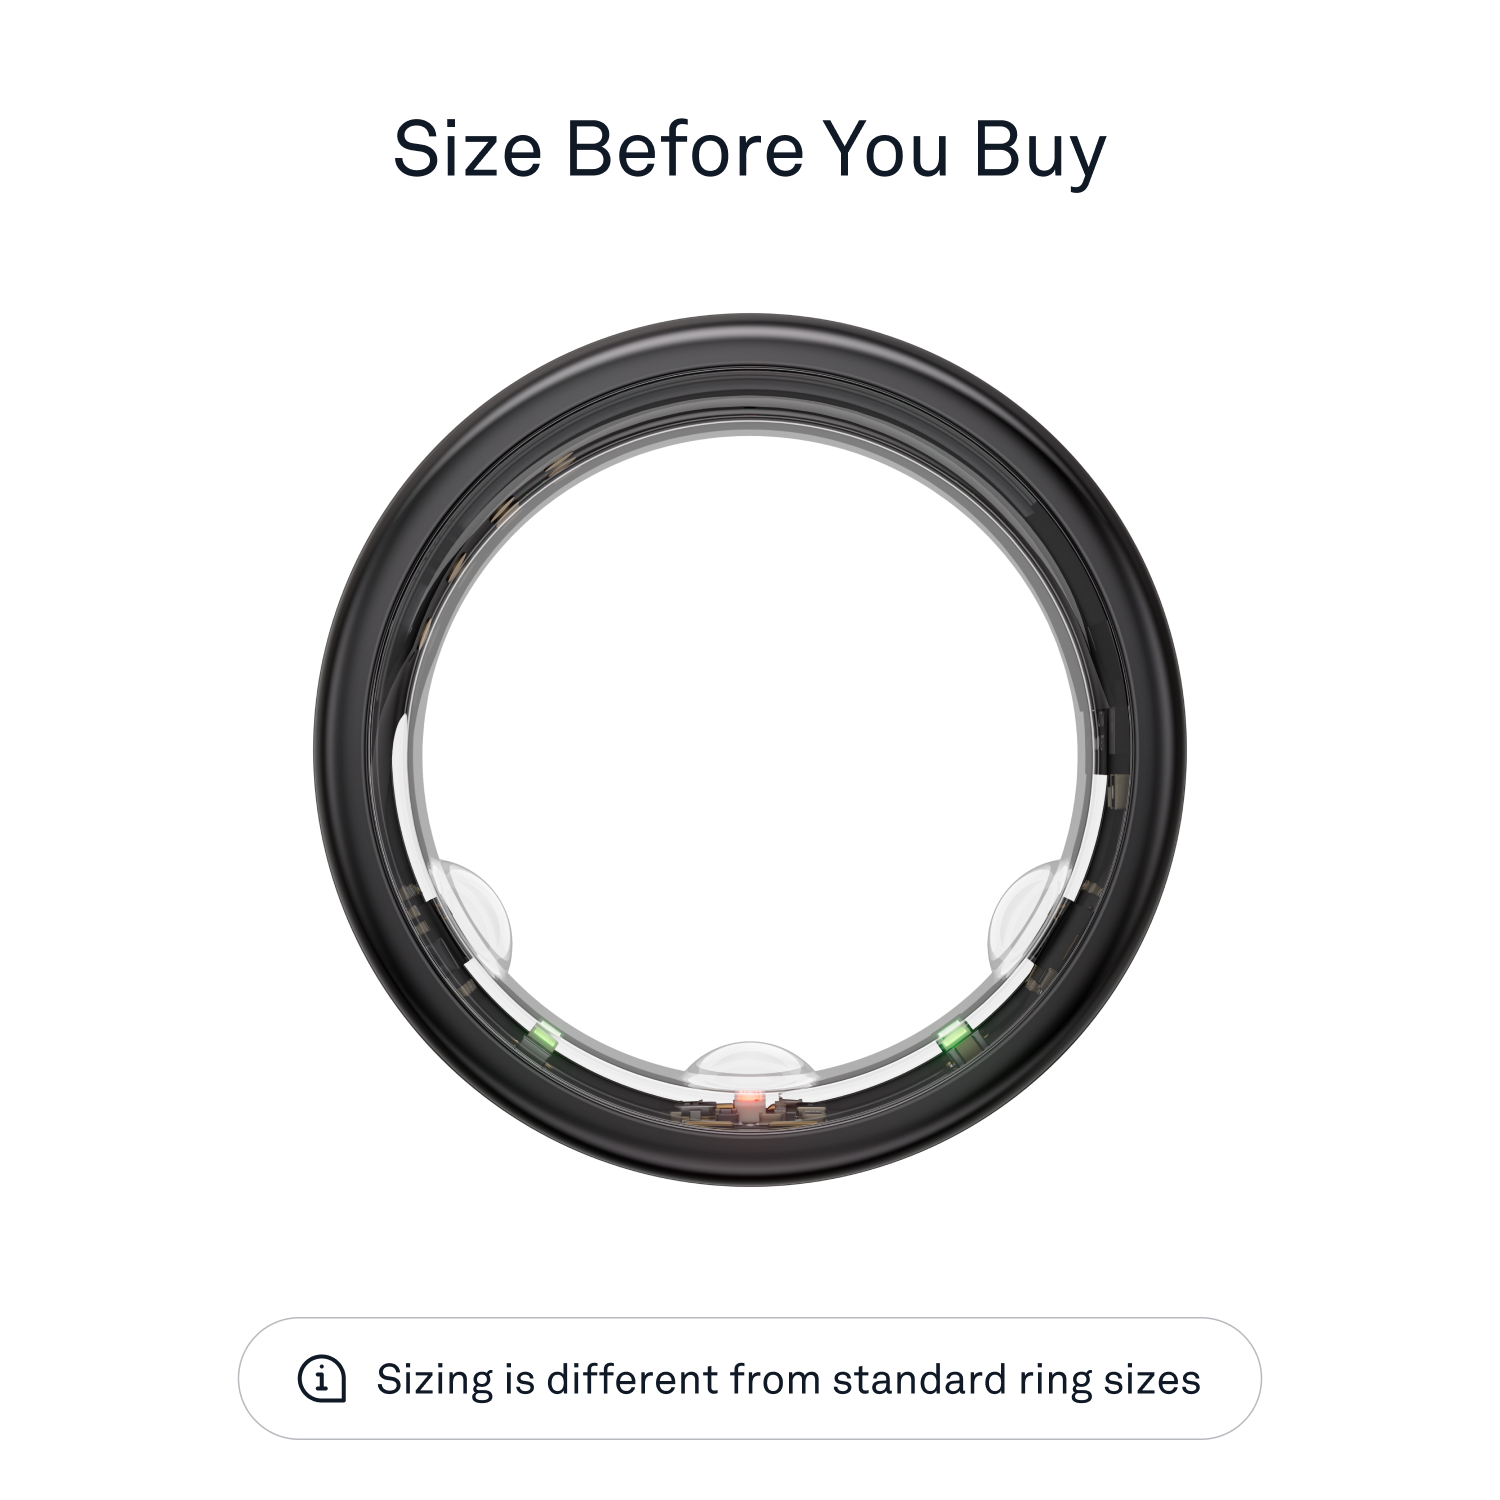 Oura Ring Gen3 Horizon Size Before You Buy Size 7 Black JZ90-51382 